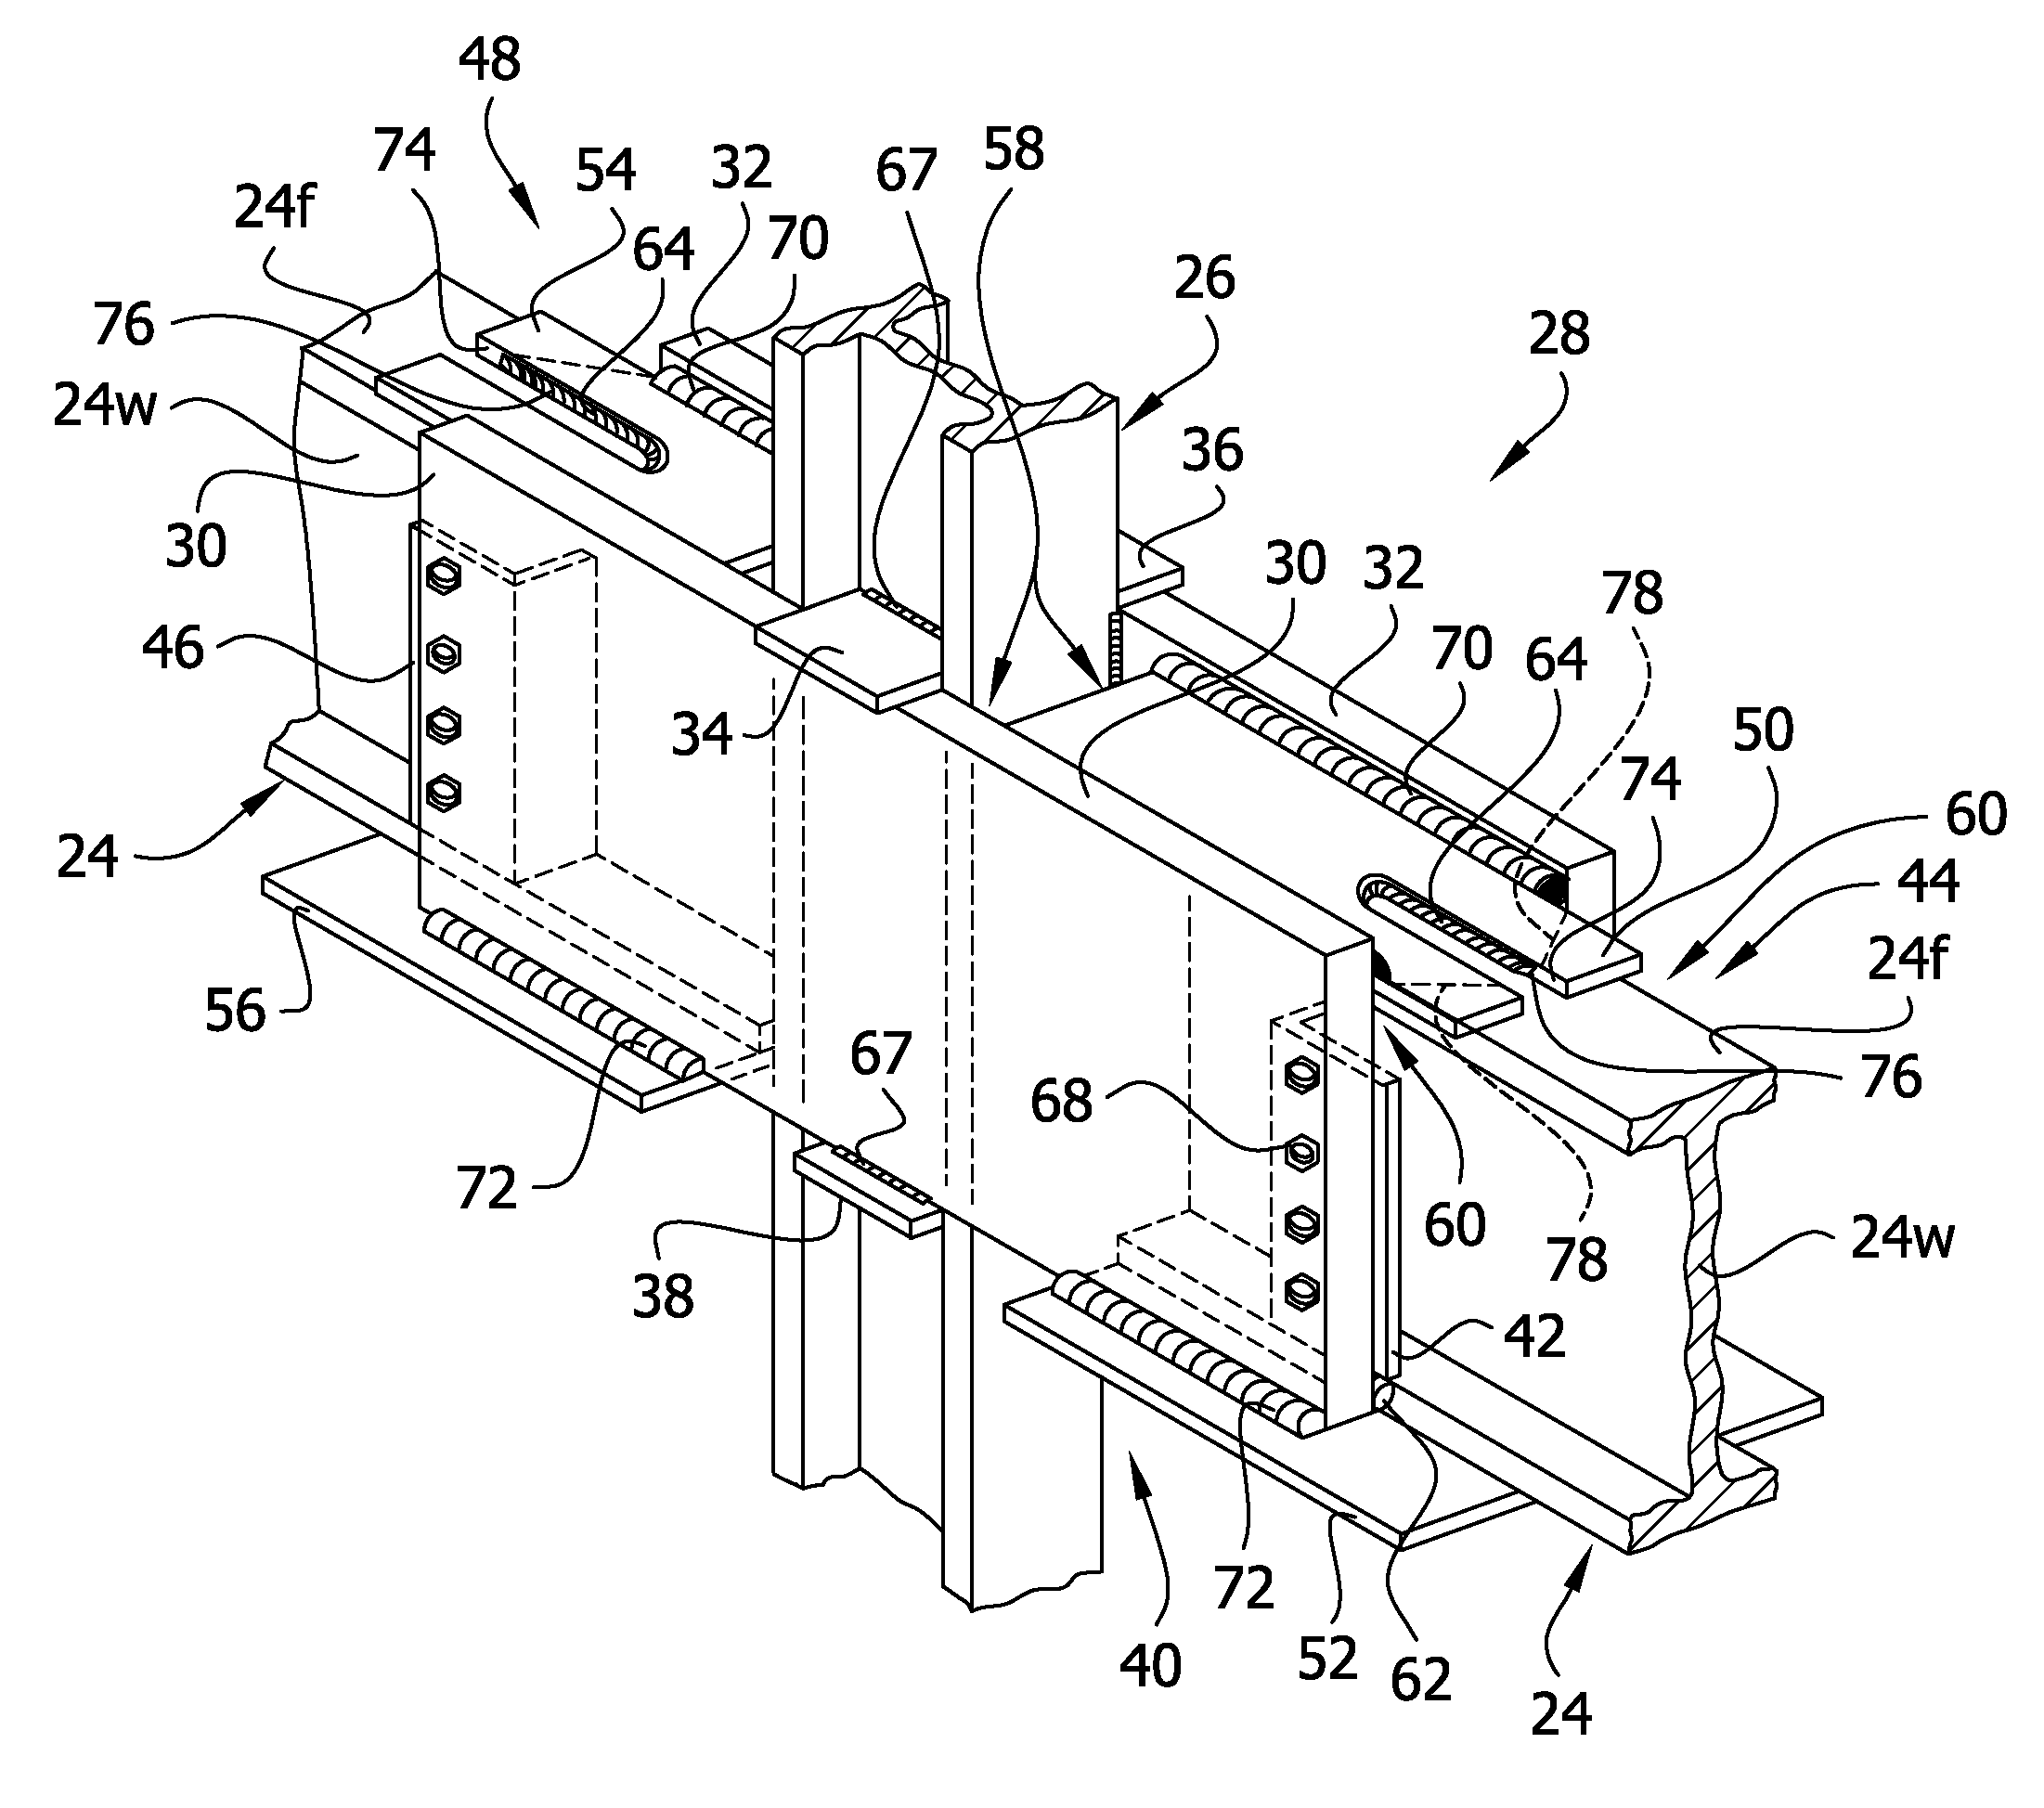 Building structure, method of making, and components